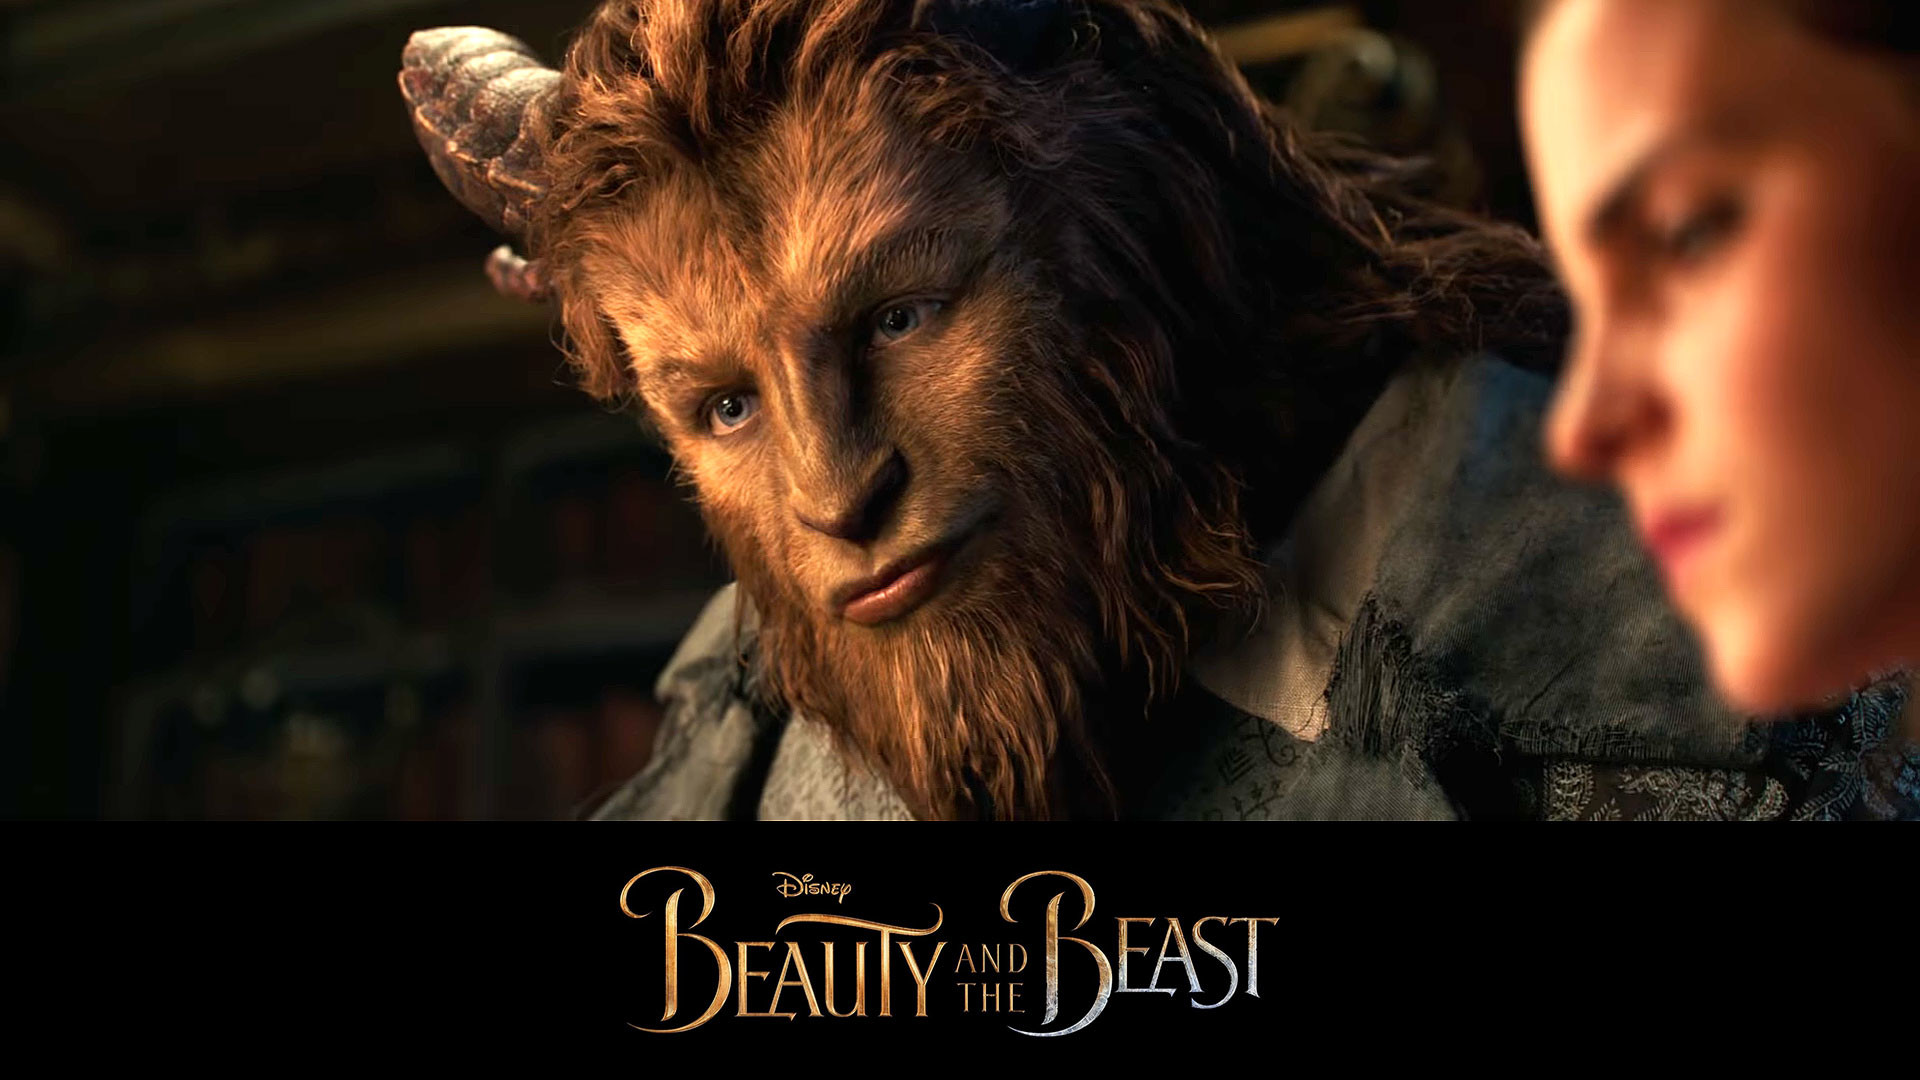 1920x1080 Jessowey and andy10B images Beauty And The Beast 2017 HD wallpaper and  background photos